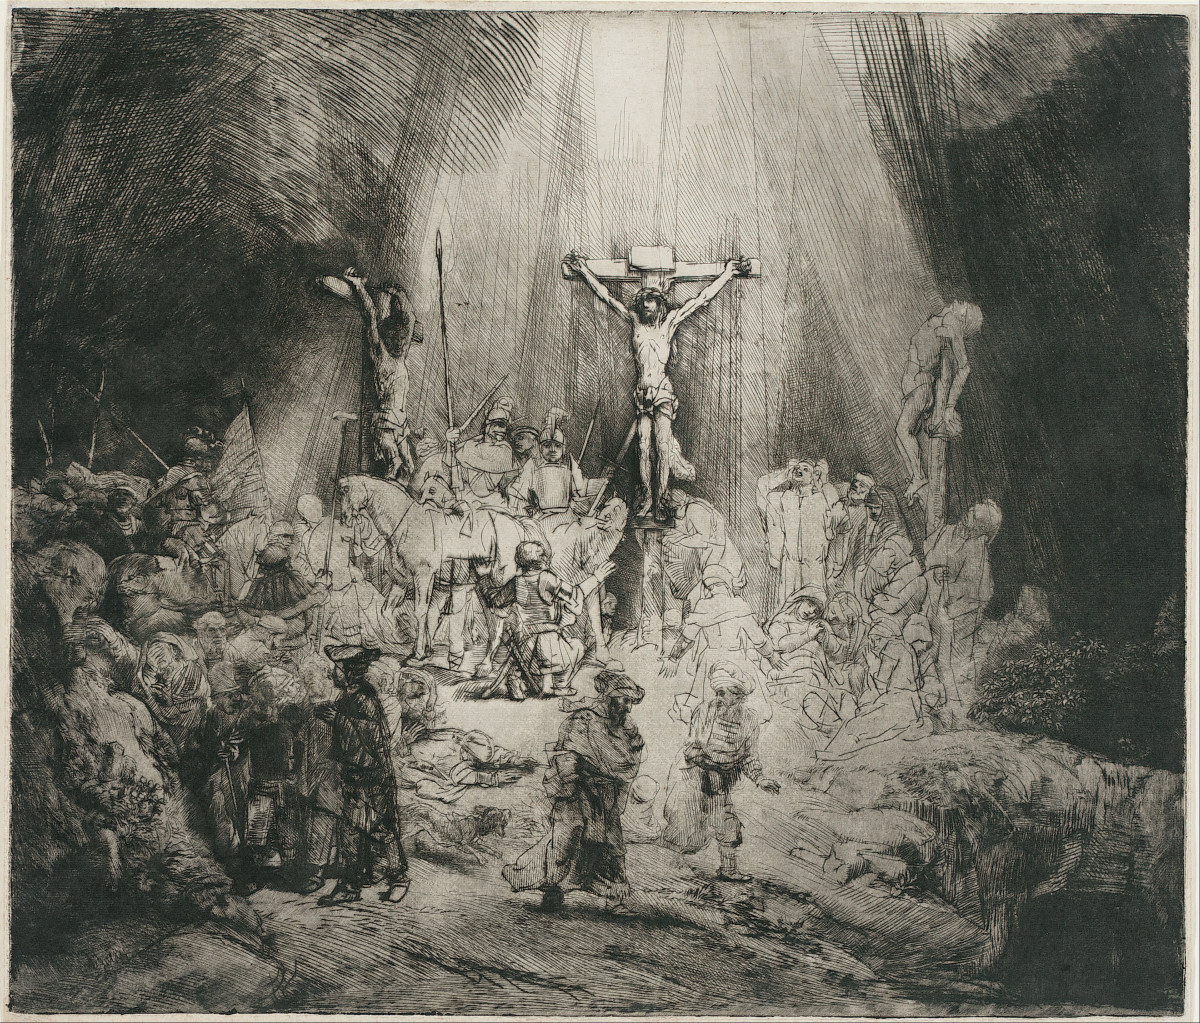 Christ Crucified Between the Two Thieves ("The Three Crosses")